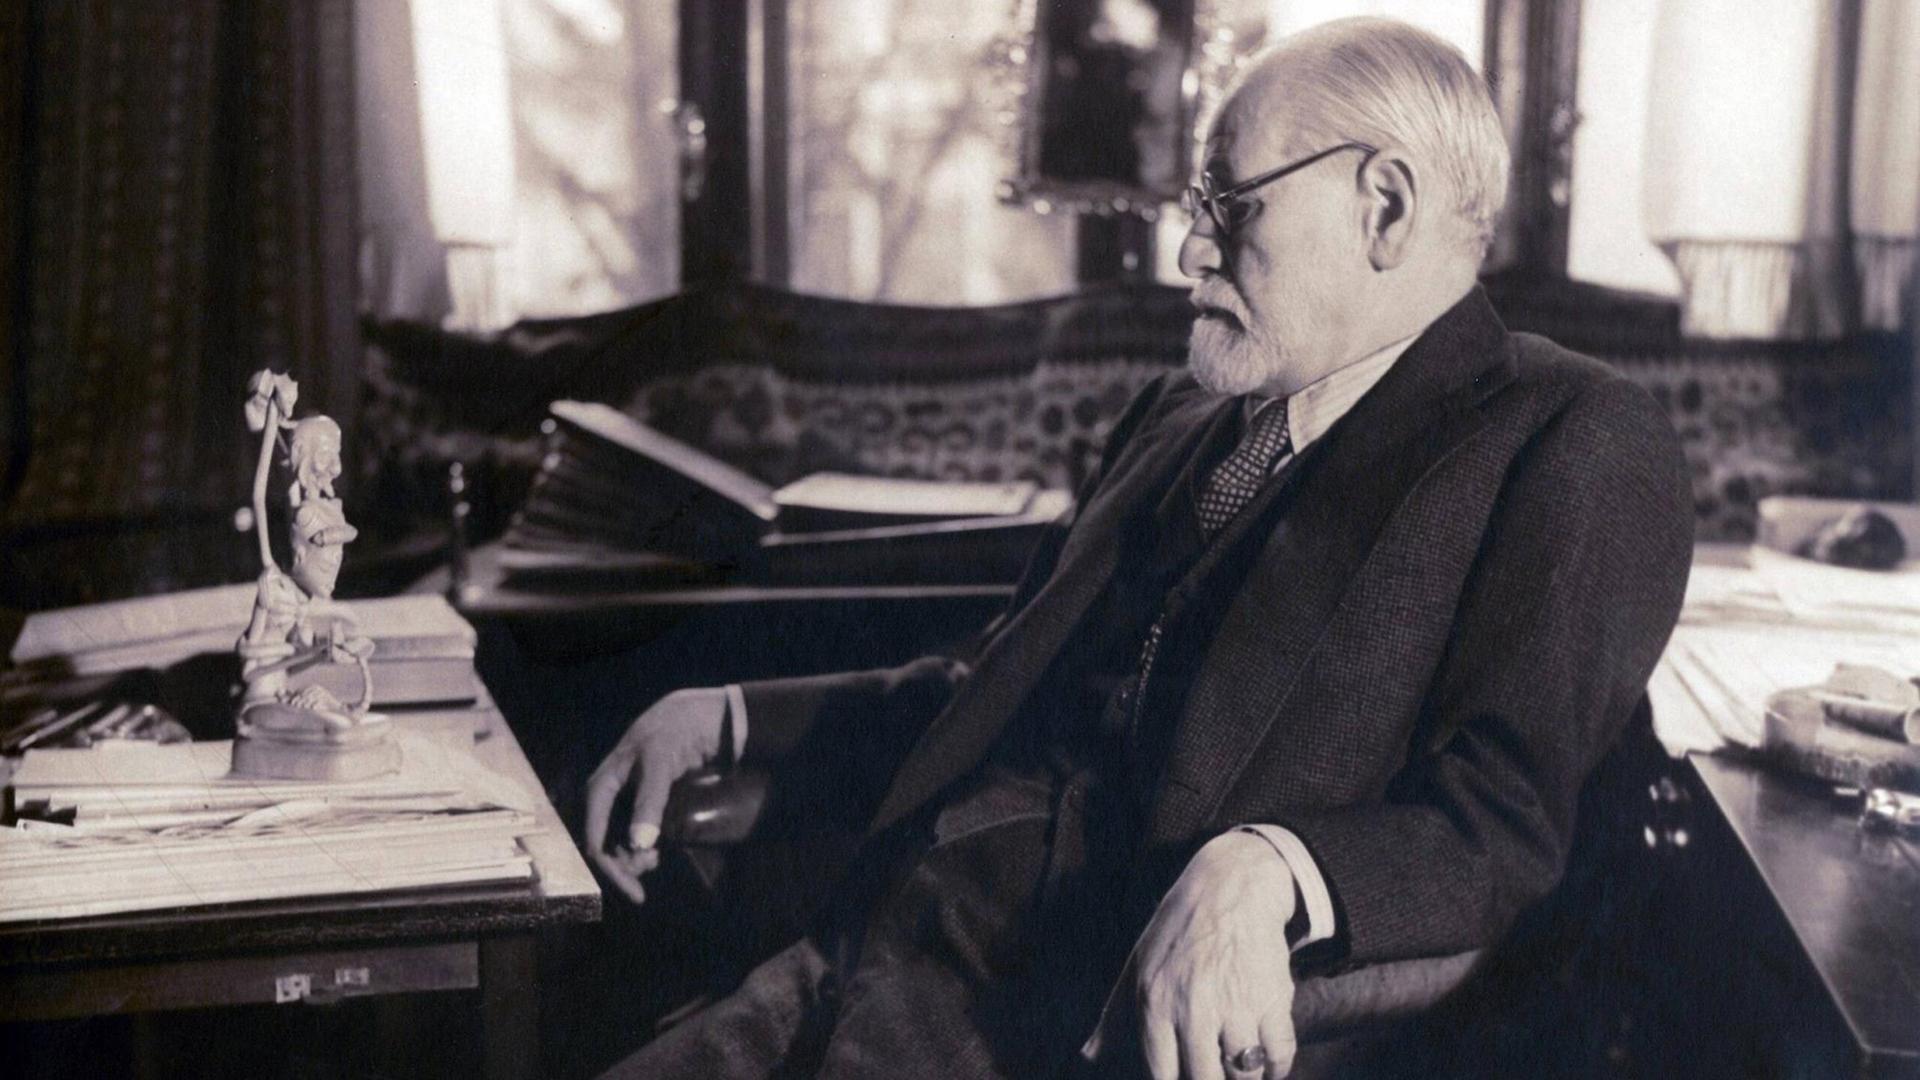 Sigmund Freud seated in his study contemplating a carved figurine possibly Javanese on his desk in 1937 photography by Princess Marie Bonaparte. Courtesy Everett Collection PUBLICATIONxINxGERxSUIxAUTxONLY Copyright: xCourtesyxEverettxCollectionx HISL006 EC196